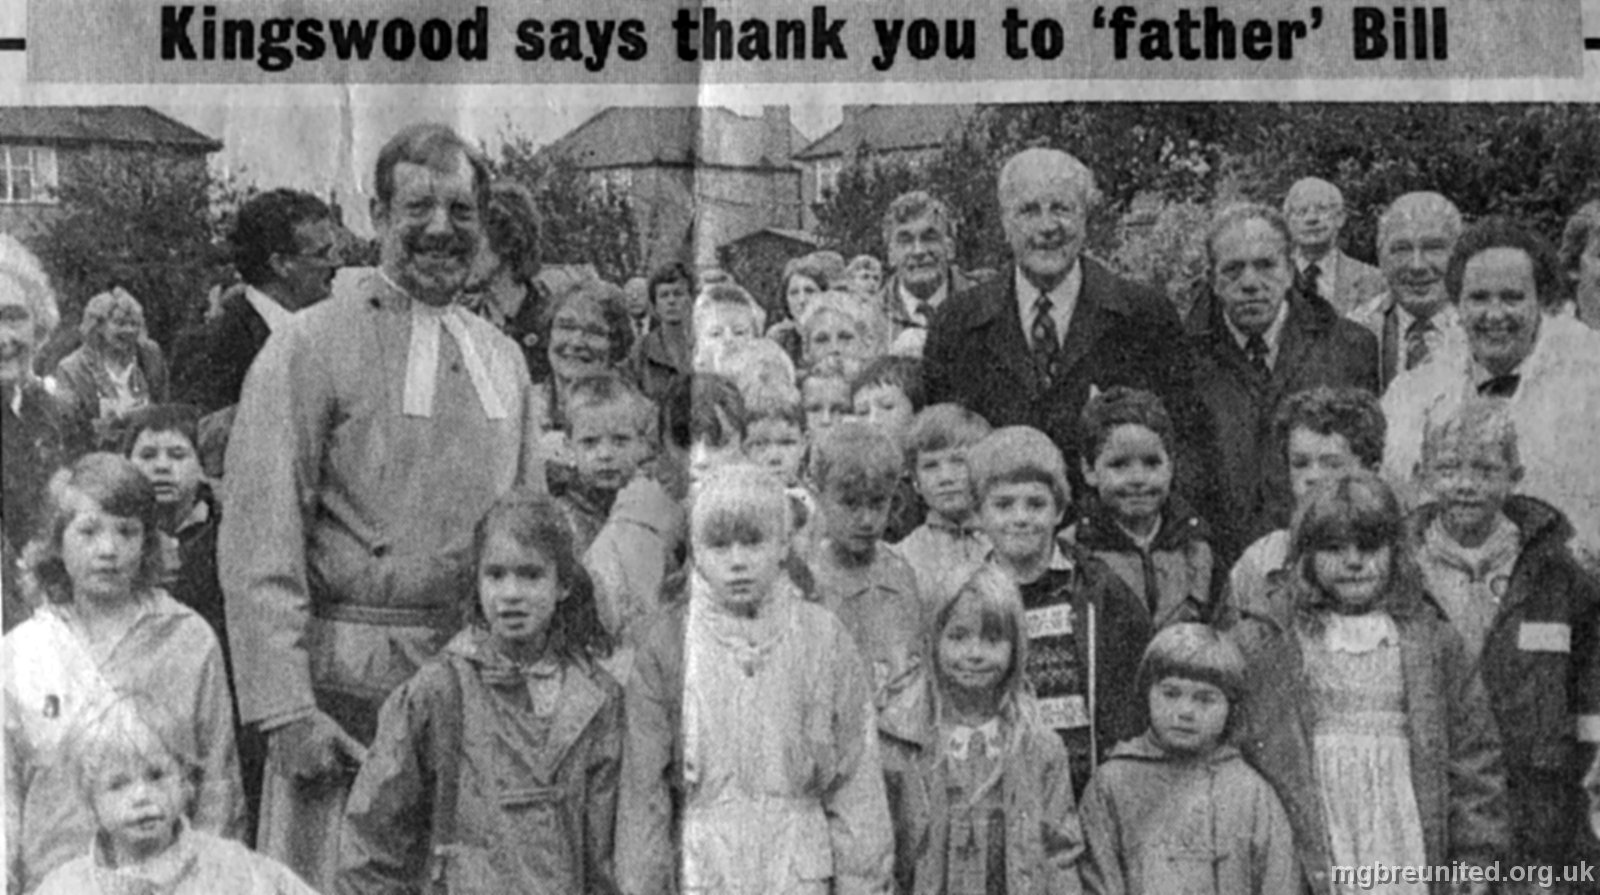 Mr Spray Founder of Kingswood Methodists - 50 years Celebration in 1989 Mr Spray founded Kingswood Methodist Church in 1939 at his home in Kingswood Road. From a newspaper cutting: OVER 200 people assembled at 14 Kingswood Road, Wollaton as the clock was turned back 50 years for “former ‘police superintendent Bill Spray of Kingswood Road, Wollaton. In 1939, Bill and his late wife Eileen, started a Sunday school in their own home and Kingswood Methodist Church was born. RETURNED Fifty years to the day, former Sunday school children and members of the present day church and Sunday school returned to Bill's home to give thanks and pay their respects to the ‘father’ of Kingswood. The Sunday service ‘89 began at Kingswood Road where short devotions took place followed by hymn singing before a march to the new church on Lambourne Drive, Wollaton. An emotional Mr Spray, pictured above with the Rev Barrie Cooke and guests at the event, said: “This was a great day, the fulfillment of a dream and one that my dear wife would have been proud of. This was a proud moment in my life and the turnout was unbelievable. I am a very happy man.” Mr Spray’s garden made an idea backdrop for the service which was conducted by the church minister, Rev Cooke, and by (Mr Spray?) himself. CELEBRATION He read from Isaiah, before the joyful gathering, having sung “Come And Join The Celebration”,“Morning Has Broken”, and “"Now Thank We All Our God" set off for the church for a service of thanks giving. The church’s minister, Rev Barrie Cooke, said: “Wollaton and Kingswood Methodists owe a debt of gratitude to a kindly dedicated man, “The efforts of he and his wife will always be remembered.”